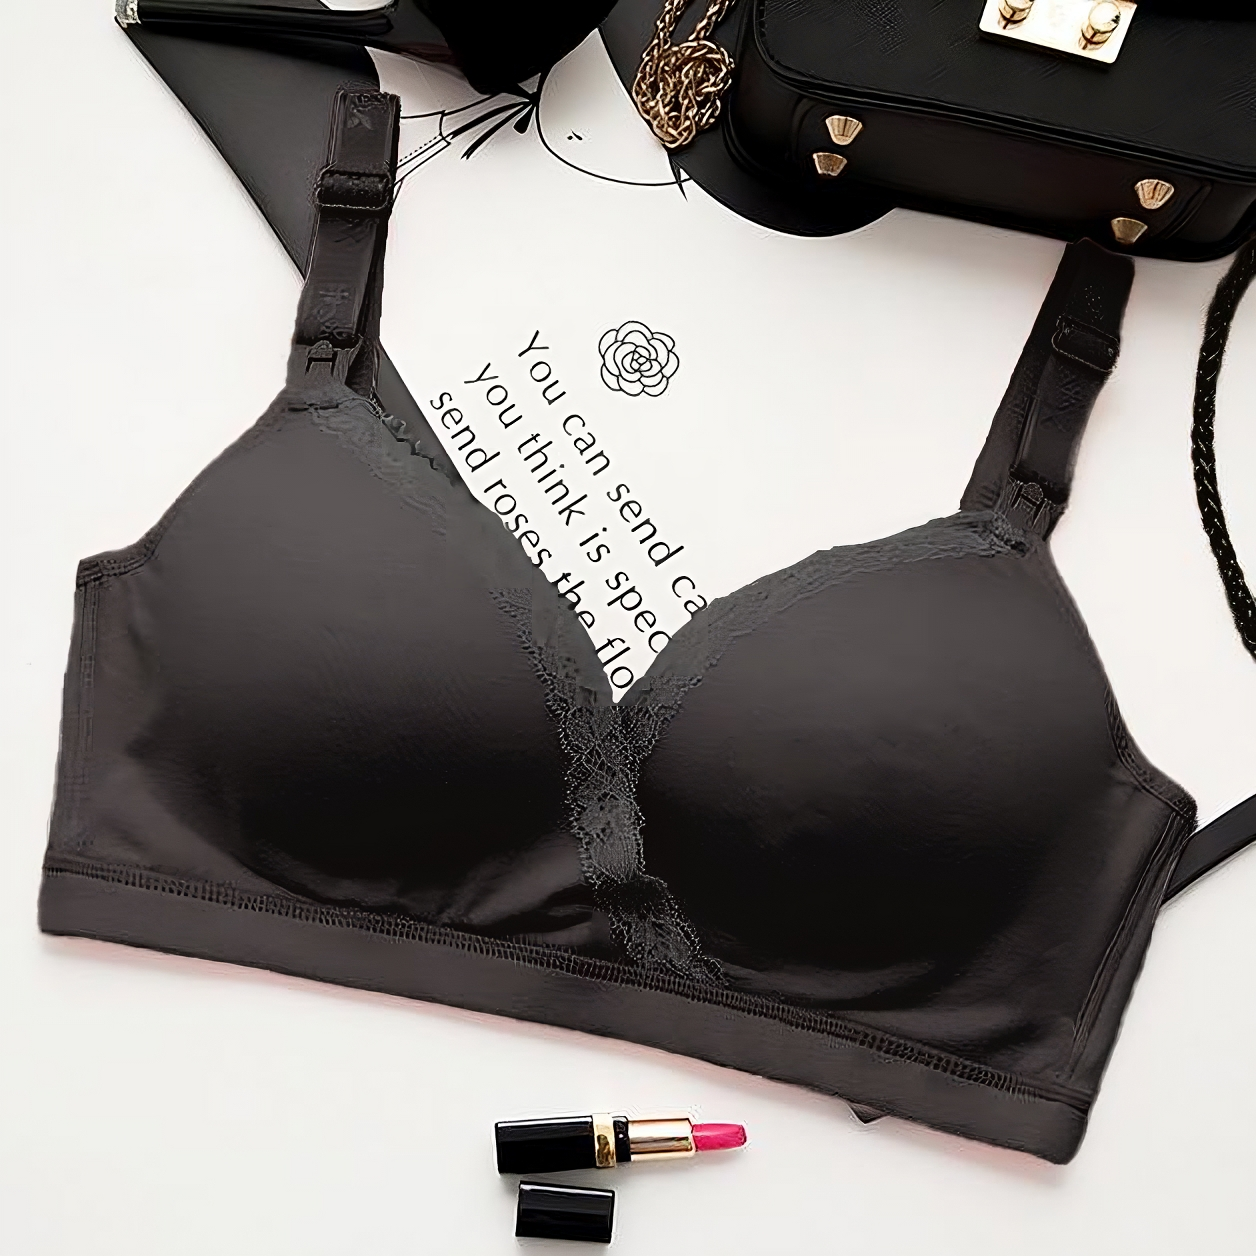 Black nursing bra with openable cups